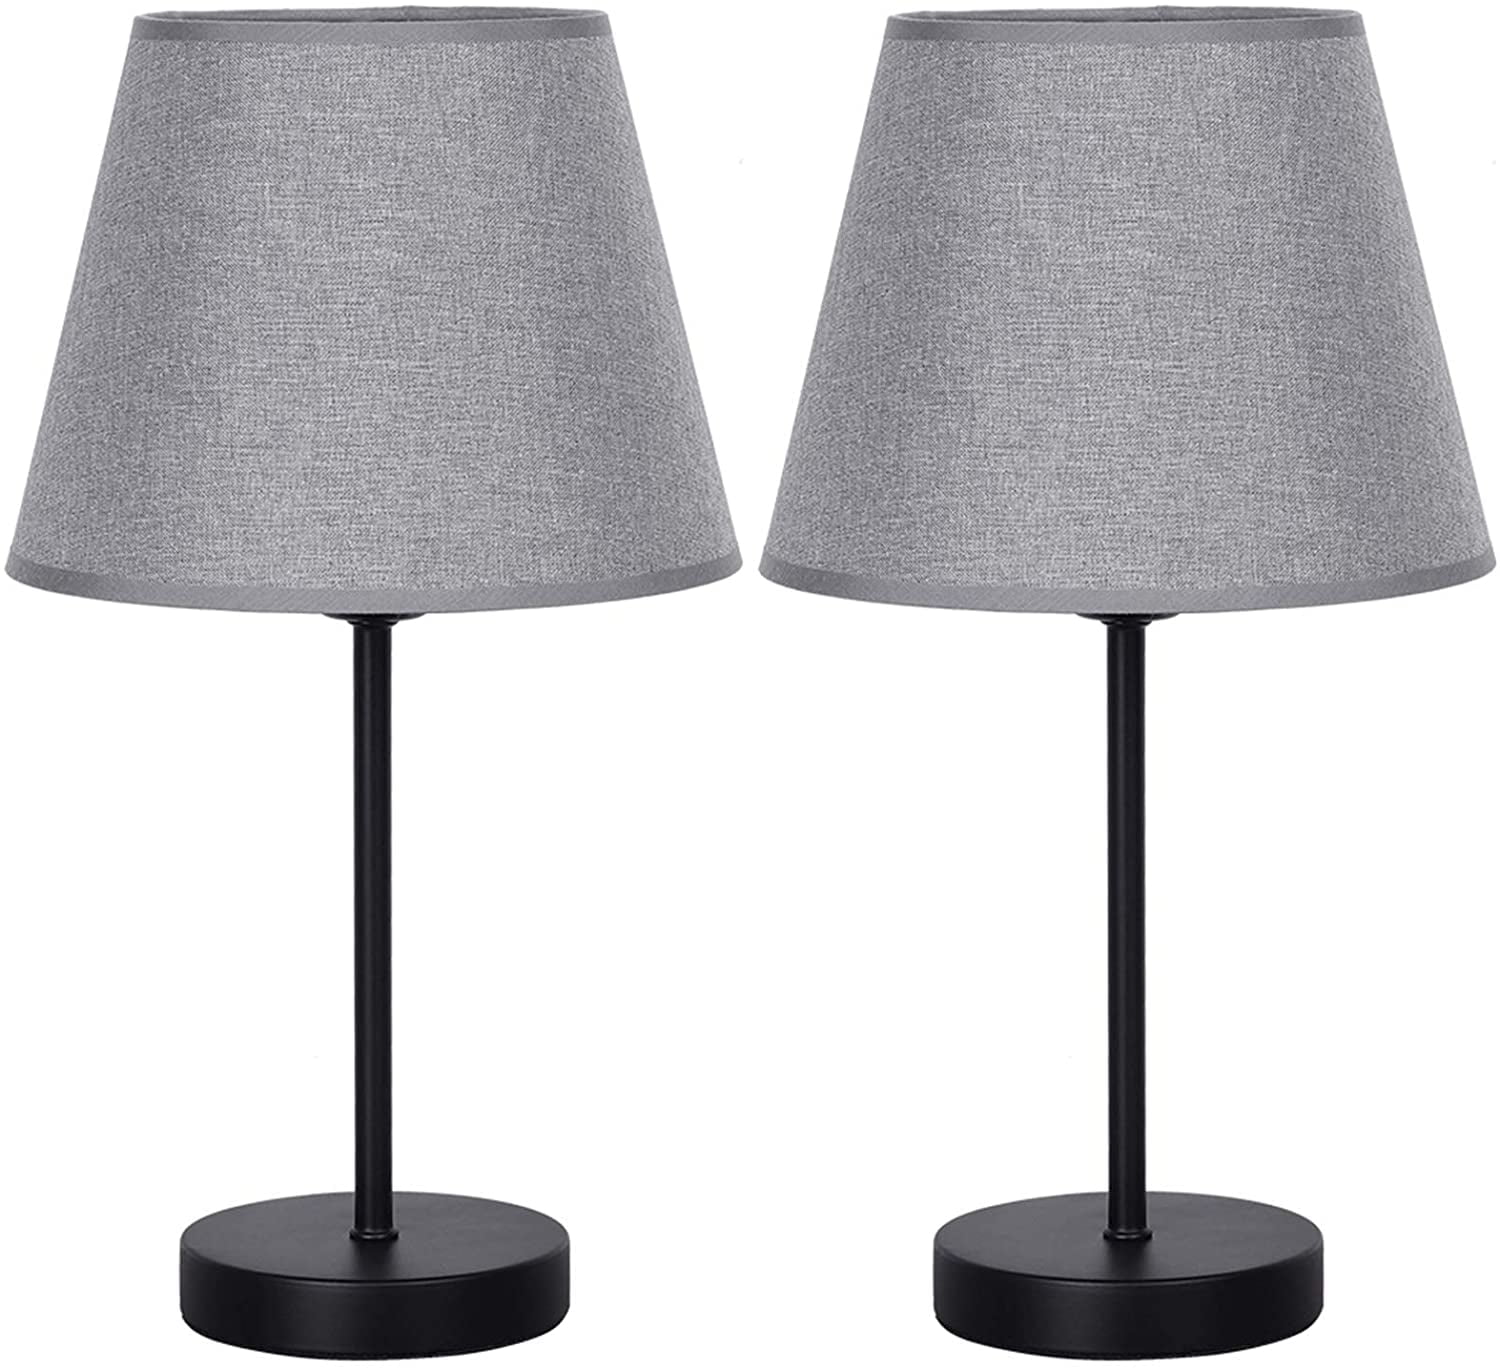 Black Small Table Lamps Vintage, Tiny Lamp Table